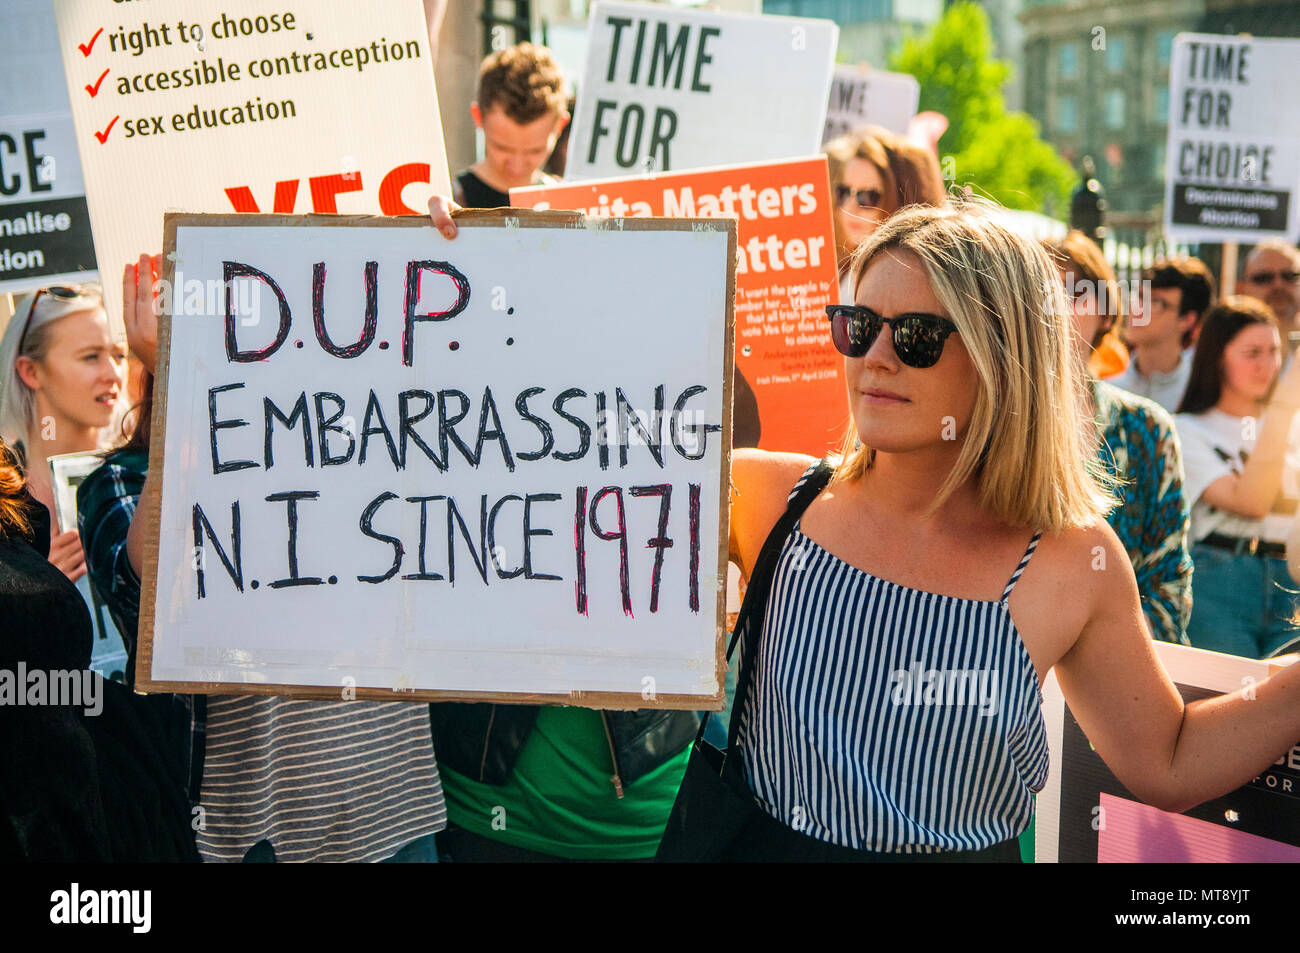 Belfast, Northern Ireland. 28/05/2018 - A woman holds a placard with the message 'DUP [Democratic Unionist Party].  Embarrassing NI [Northern Ireland] sine 1971'.  Around 500 people gather at Belfast City Hall to call for the decriminalisation of abortion in Northern Ireland.  It comes the day after a referendum held in the Republic of Ireland returned a substantial 'Yes' to removing the 8th amendment to the constitution, which gives equal right of life to both the mother and baby, effectively banning abortion in all circumstances. Stock Photo